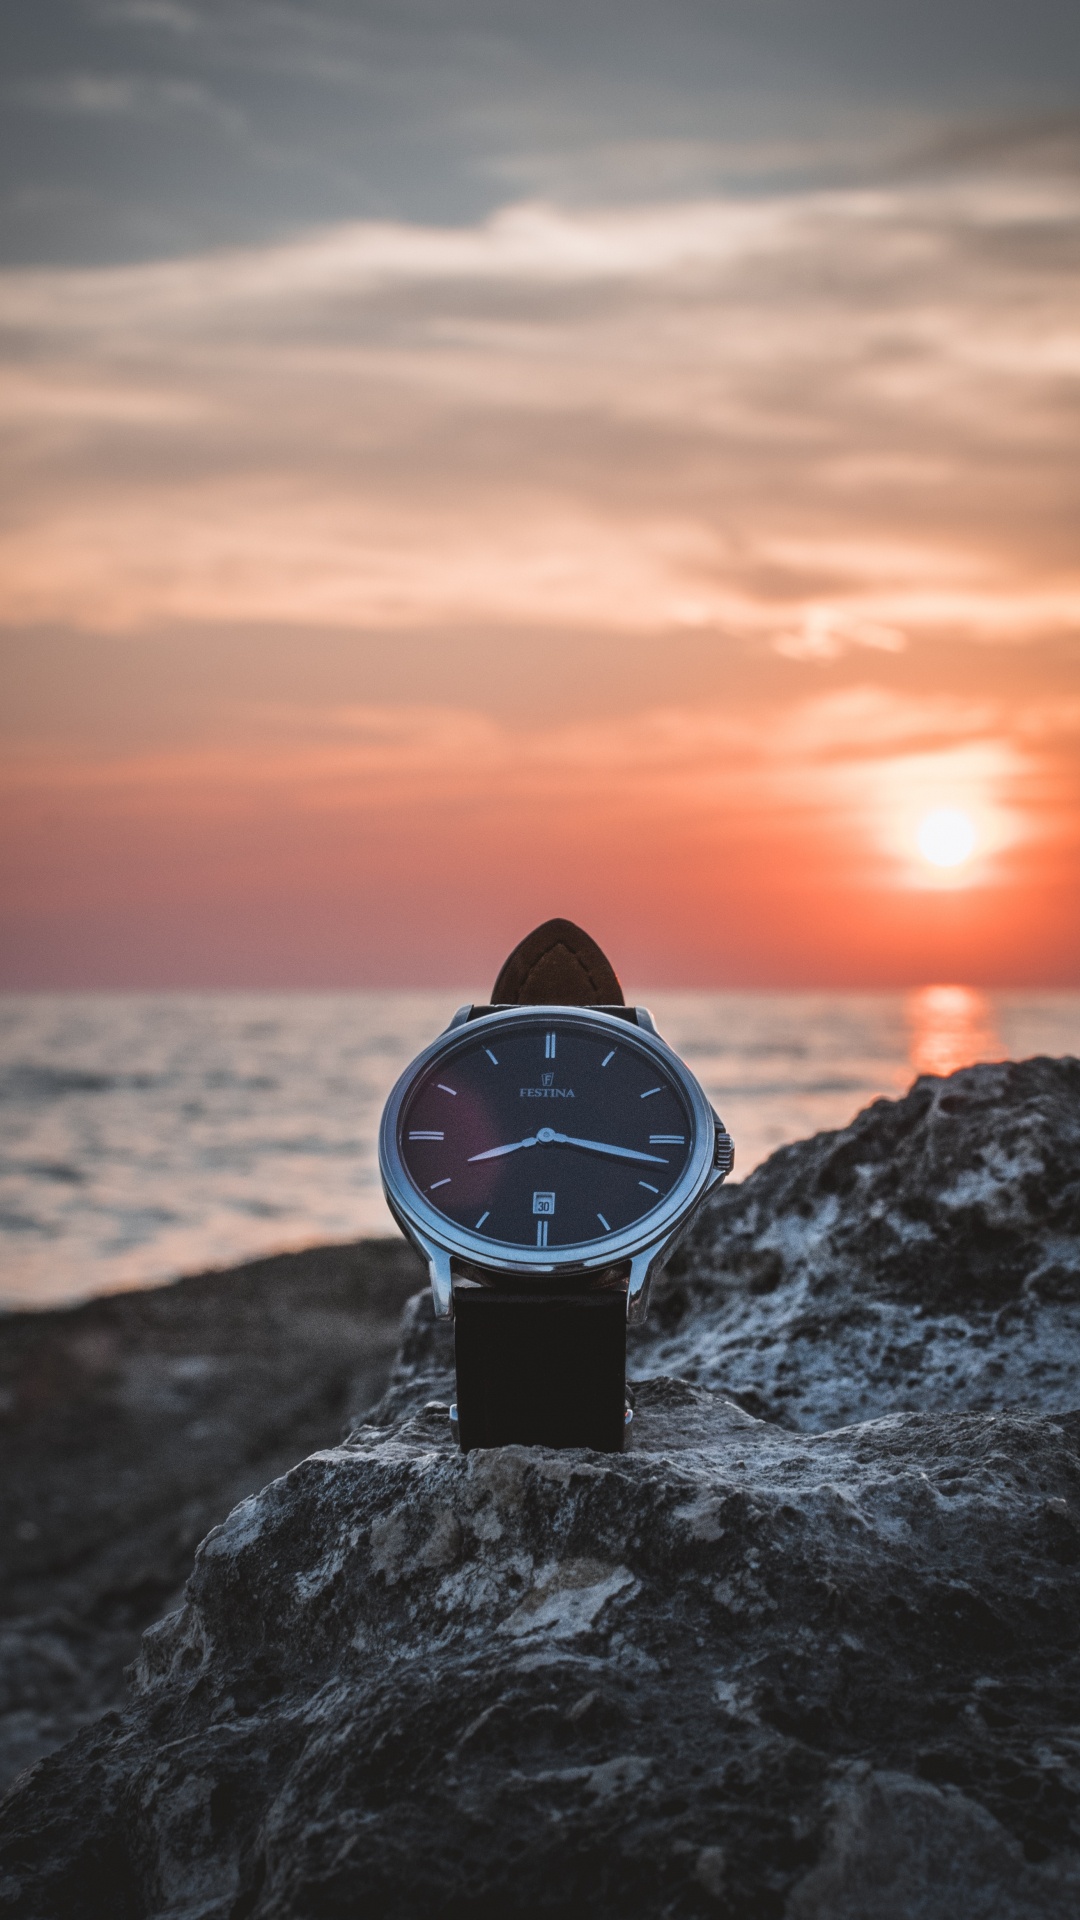 Black and White Analog Watch on Gray Rock Near Sea During Sunset. Wallpaper in 1080x1920 Resolution